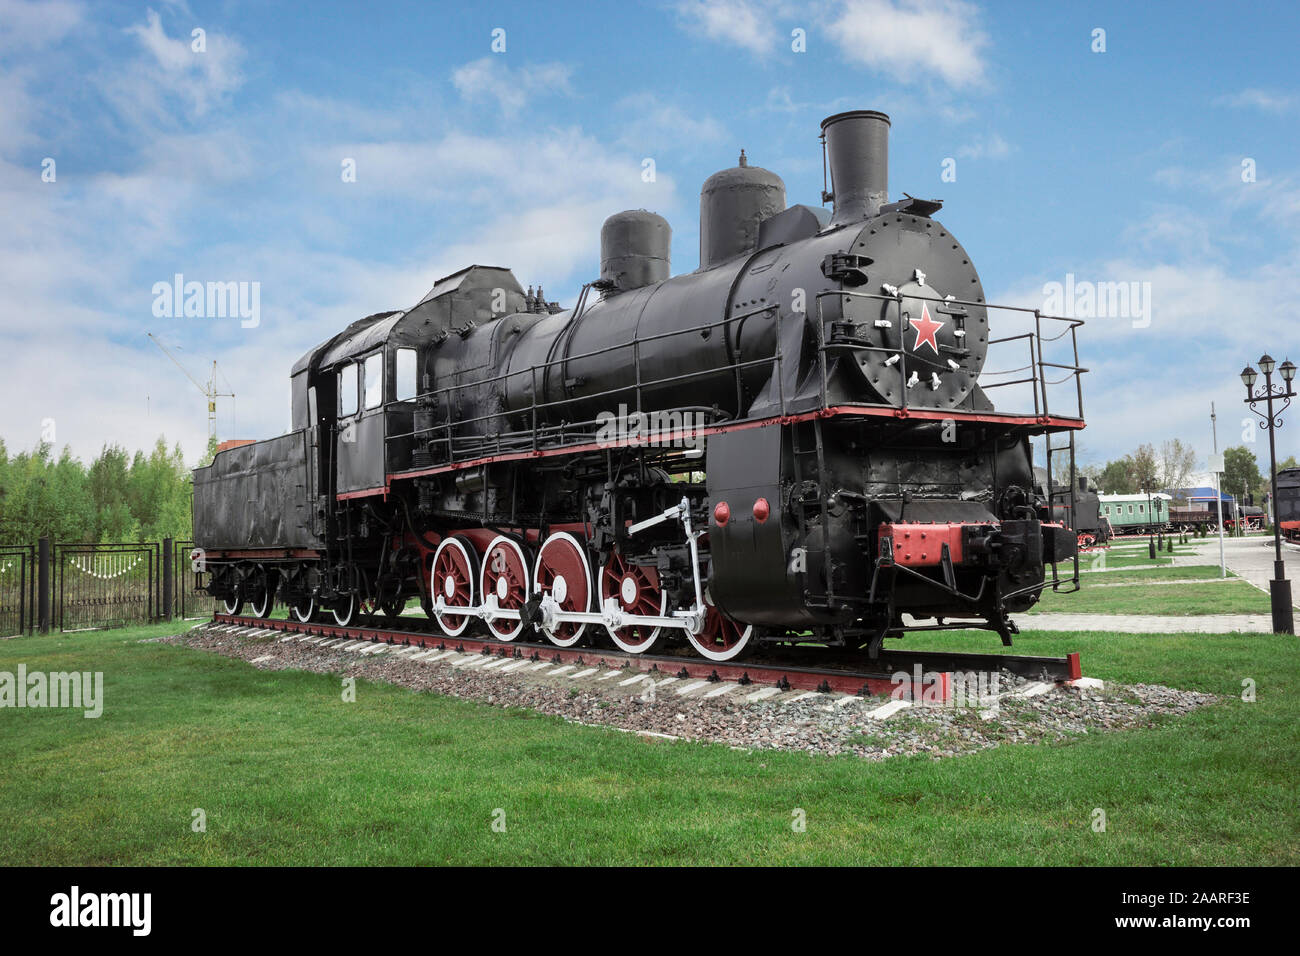 Russian steam locomotive of the first half of the 20th century. It was made until 1957 Stock Photo